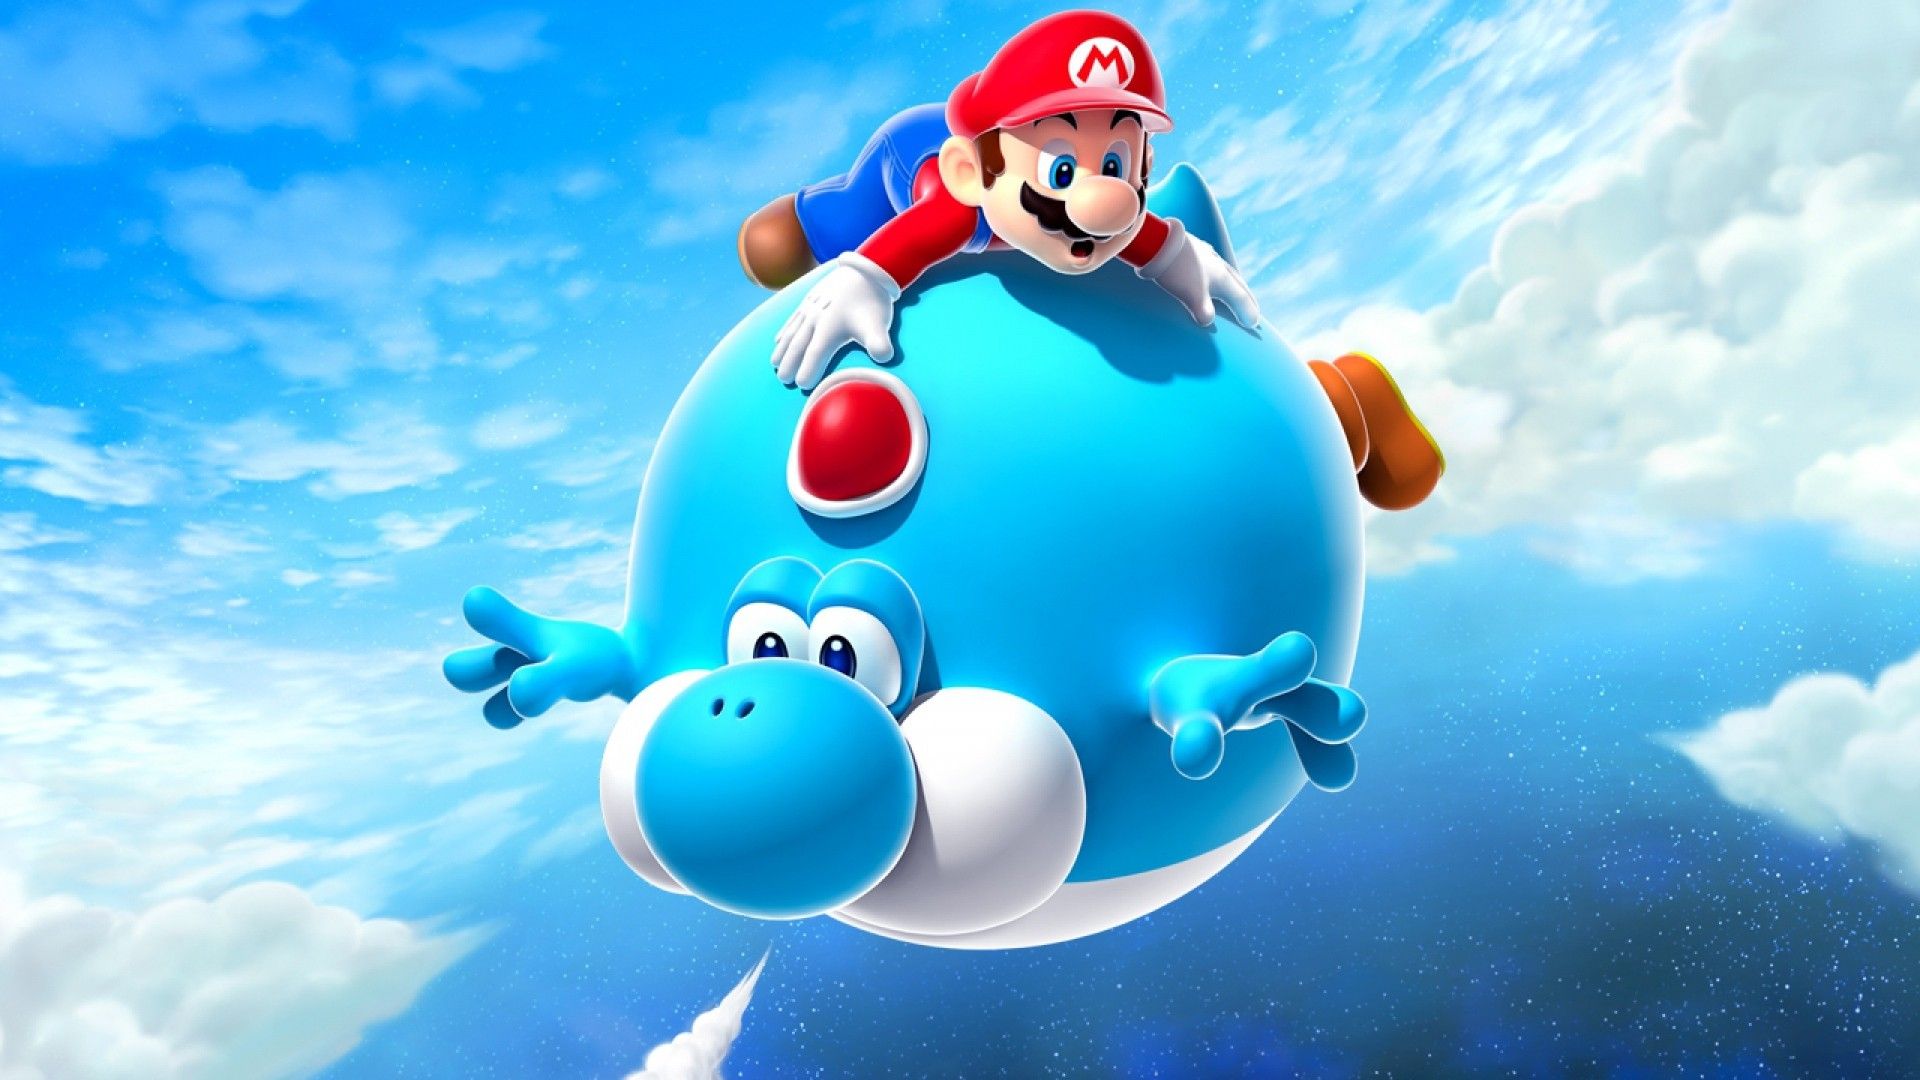 Mario Air Balloon Yoshi Blue Super Mario Galaxy Picture HD Background Wallpaper Free Cool Tablet Smart Phone 4k High Definition 1920x1080